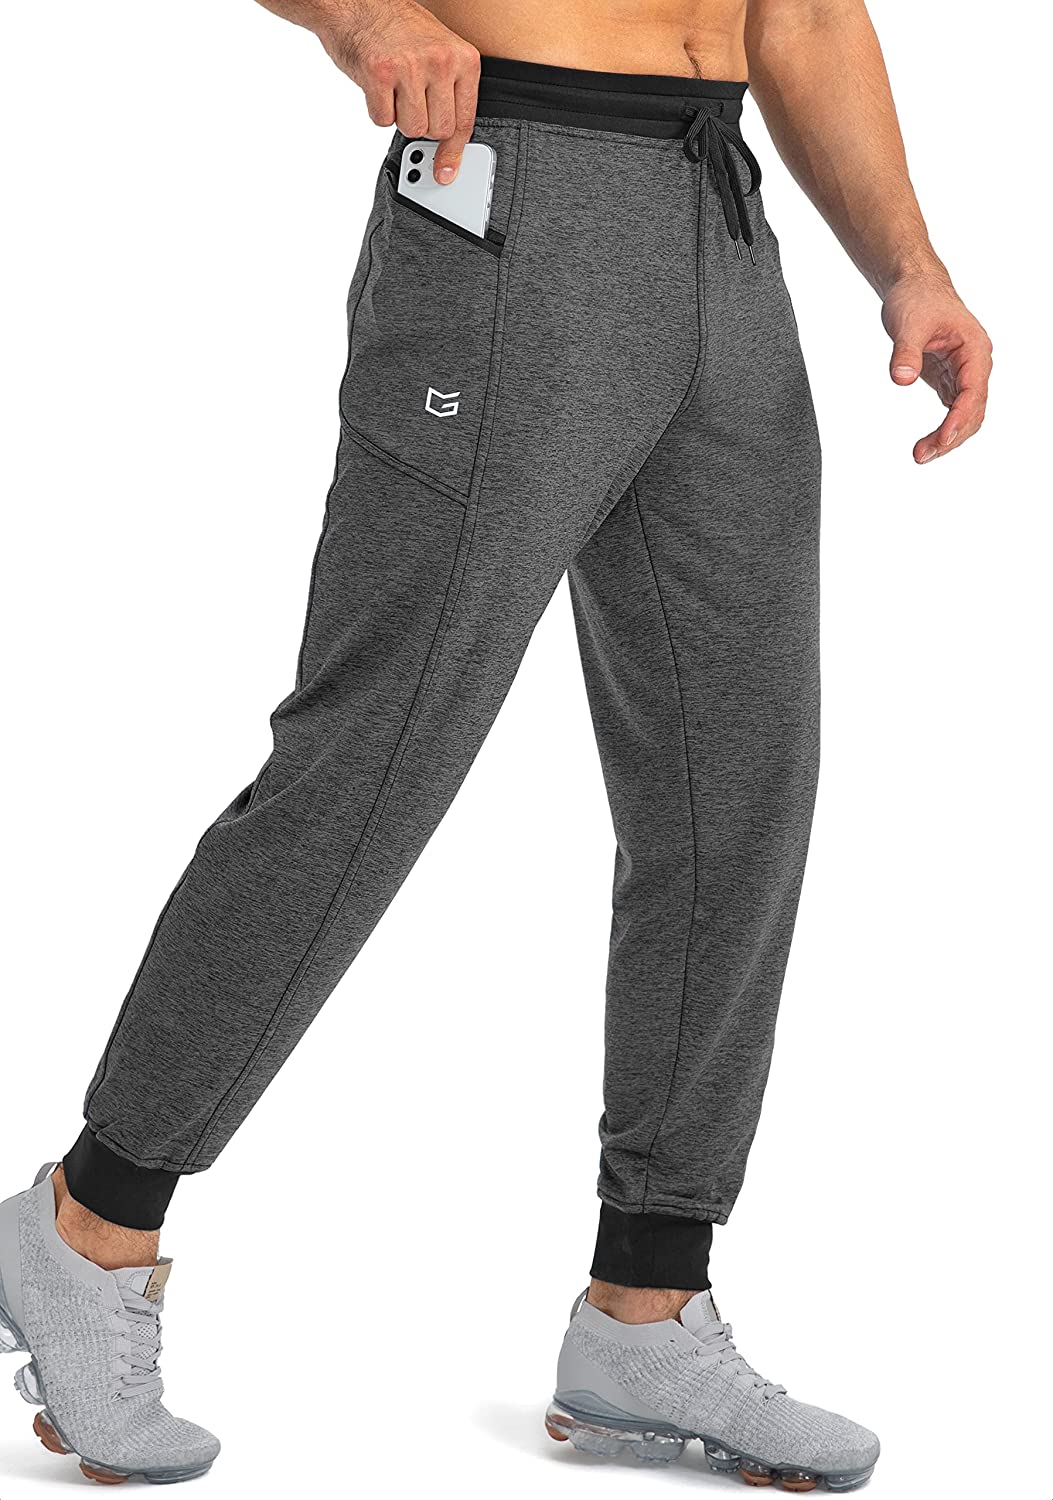 G Gradual Men's Sweatpants with Zipper Pockets Tapered Joggers for Men  Athletic Pants for Workout, Jogging, Running Black Large